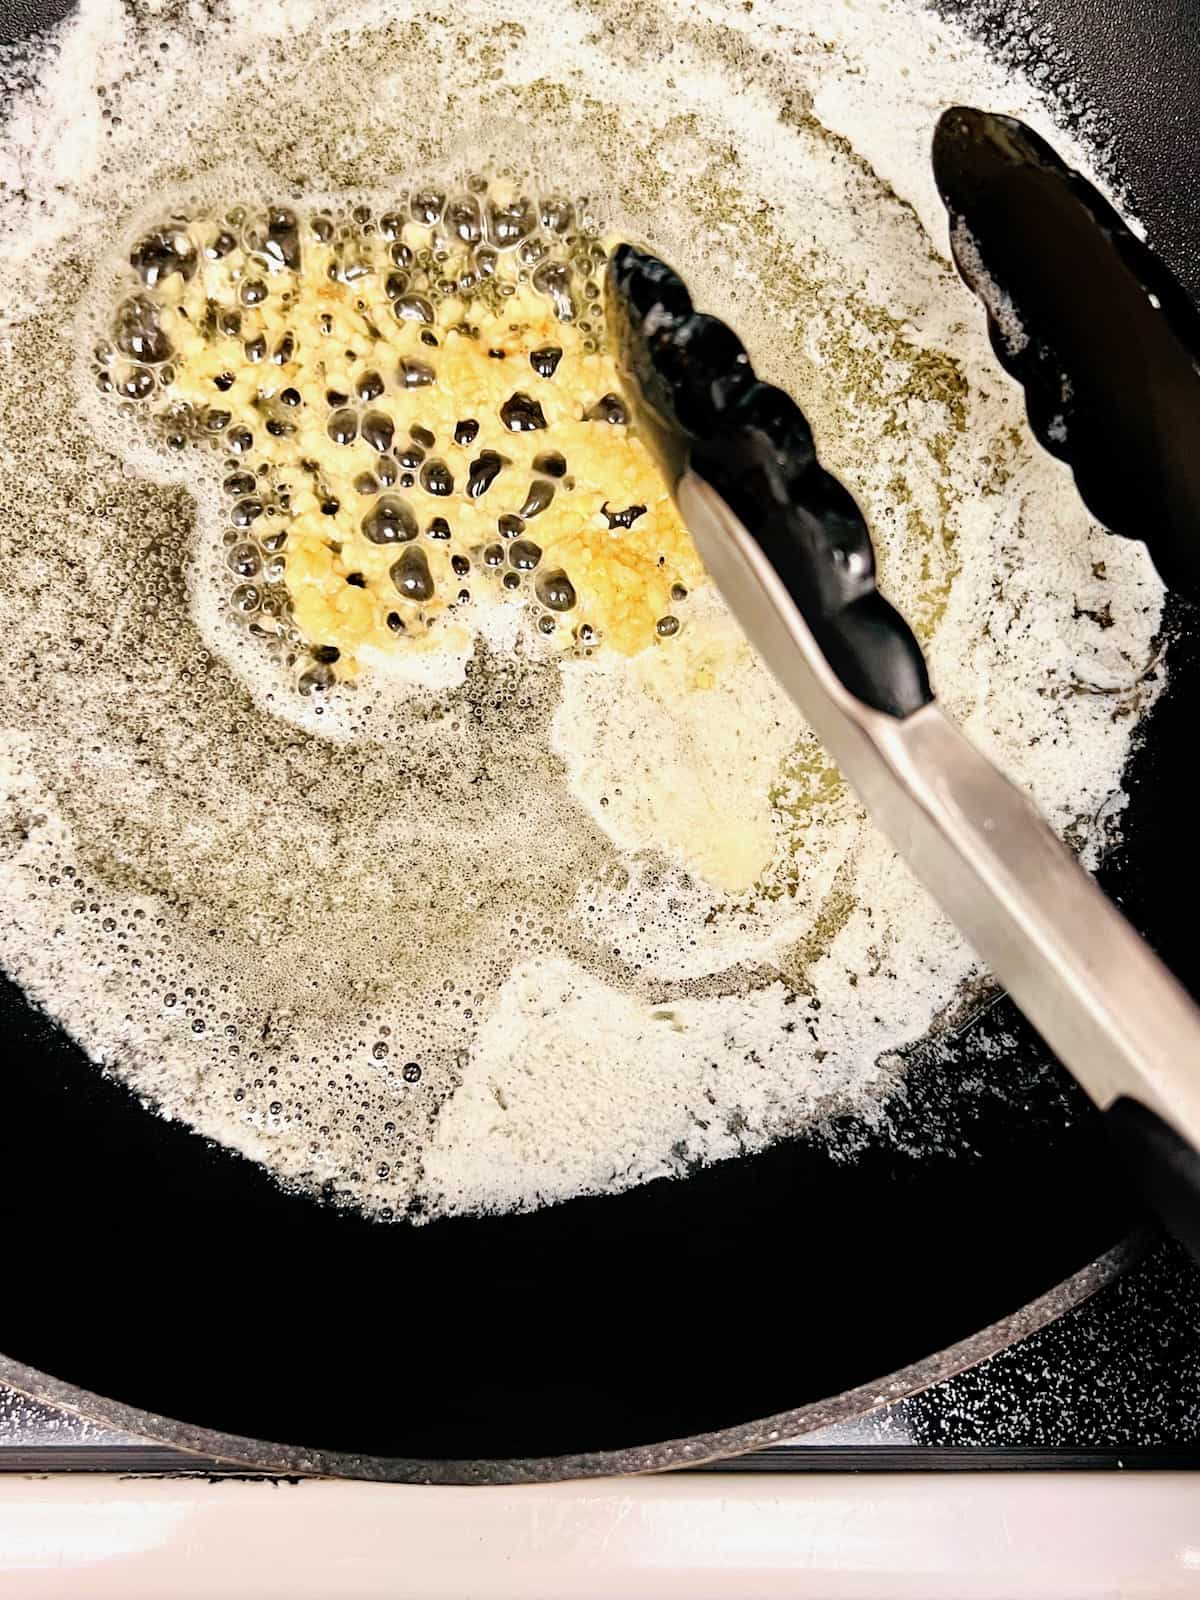 Melted butter and garlic in the pan.